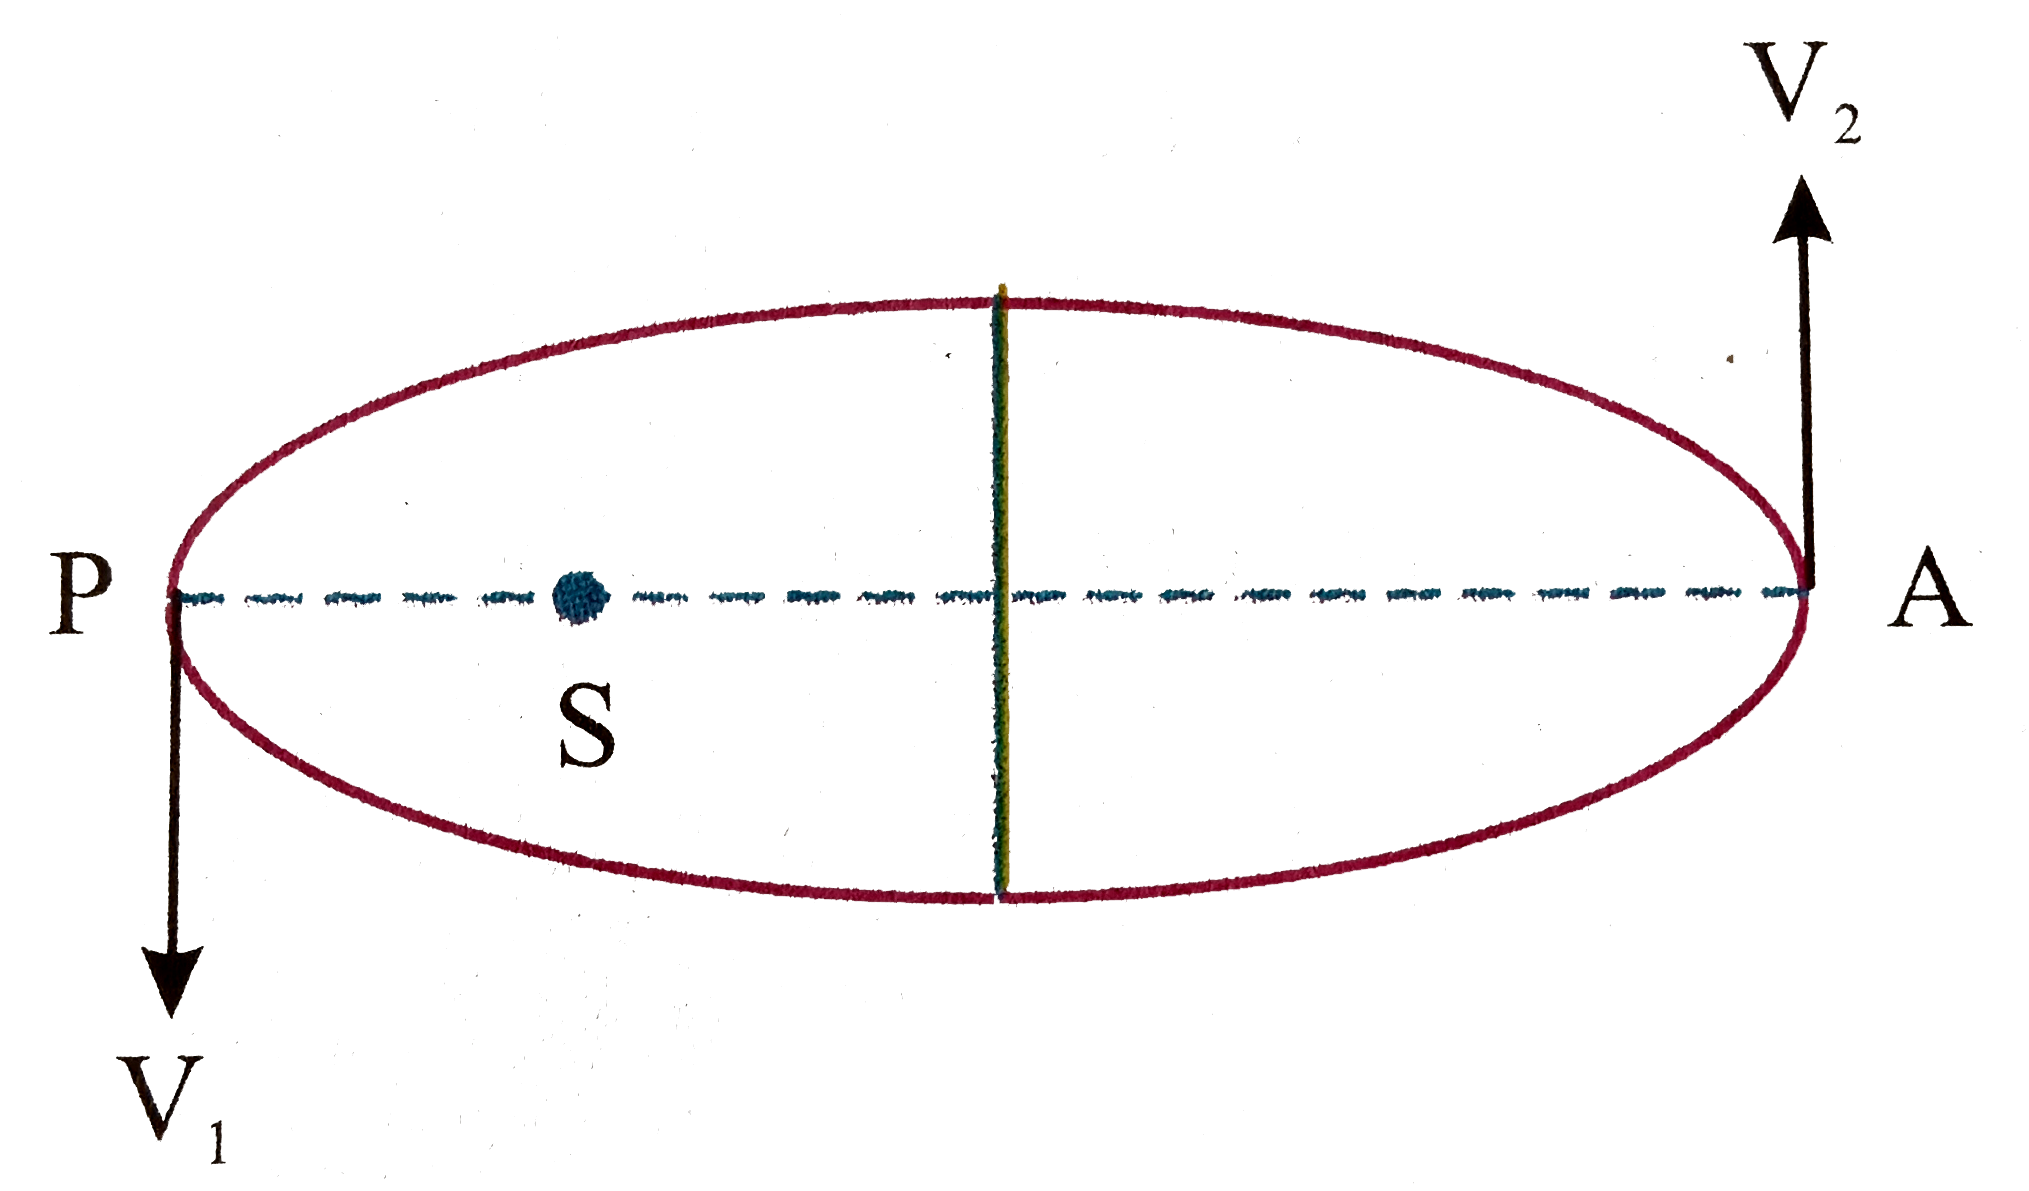 A planet of mass m is moving in an elliptical orbit around the sun of mass M. The semi major axis of its orbit is a, eccentricity is e.   Find speed of planet V(2) at aphelion A.